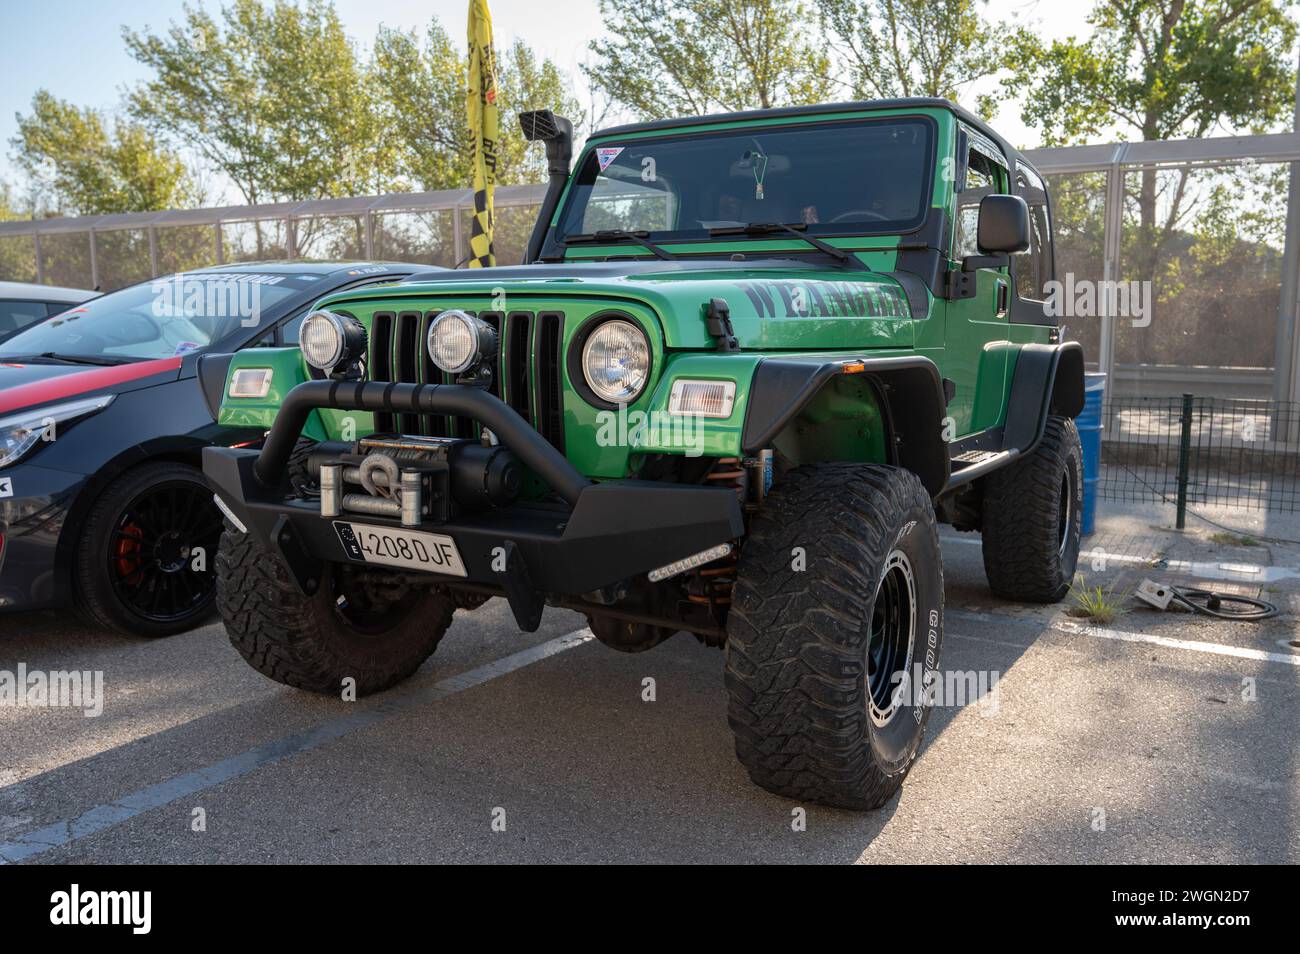 Front view of a green Jeep Wrangler ready for adventure Stock Photo